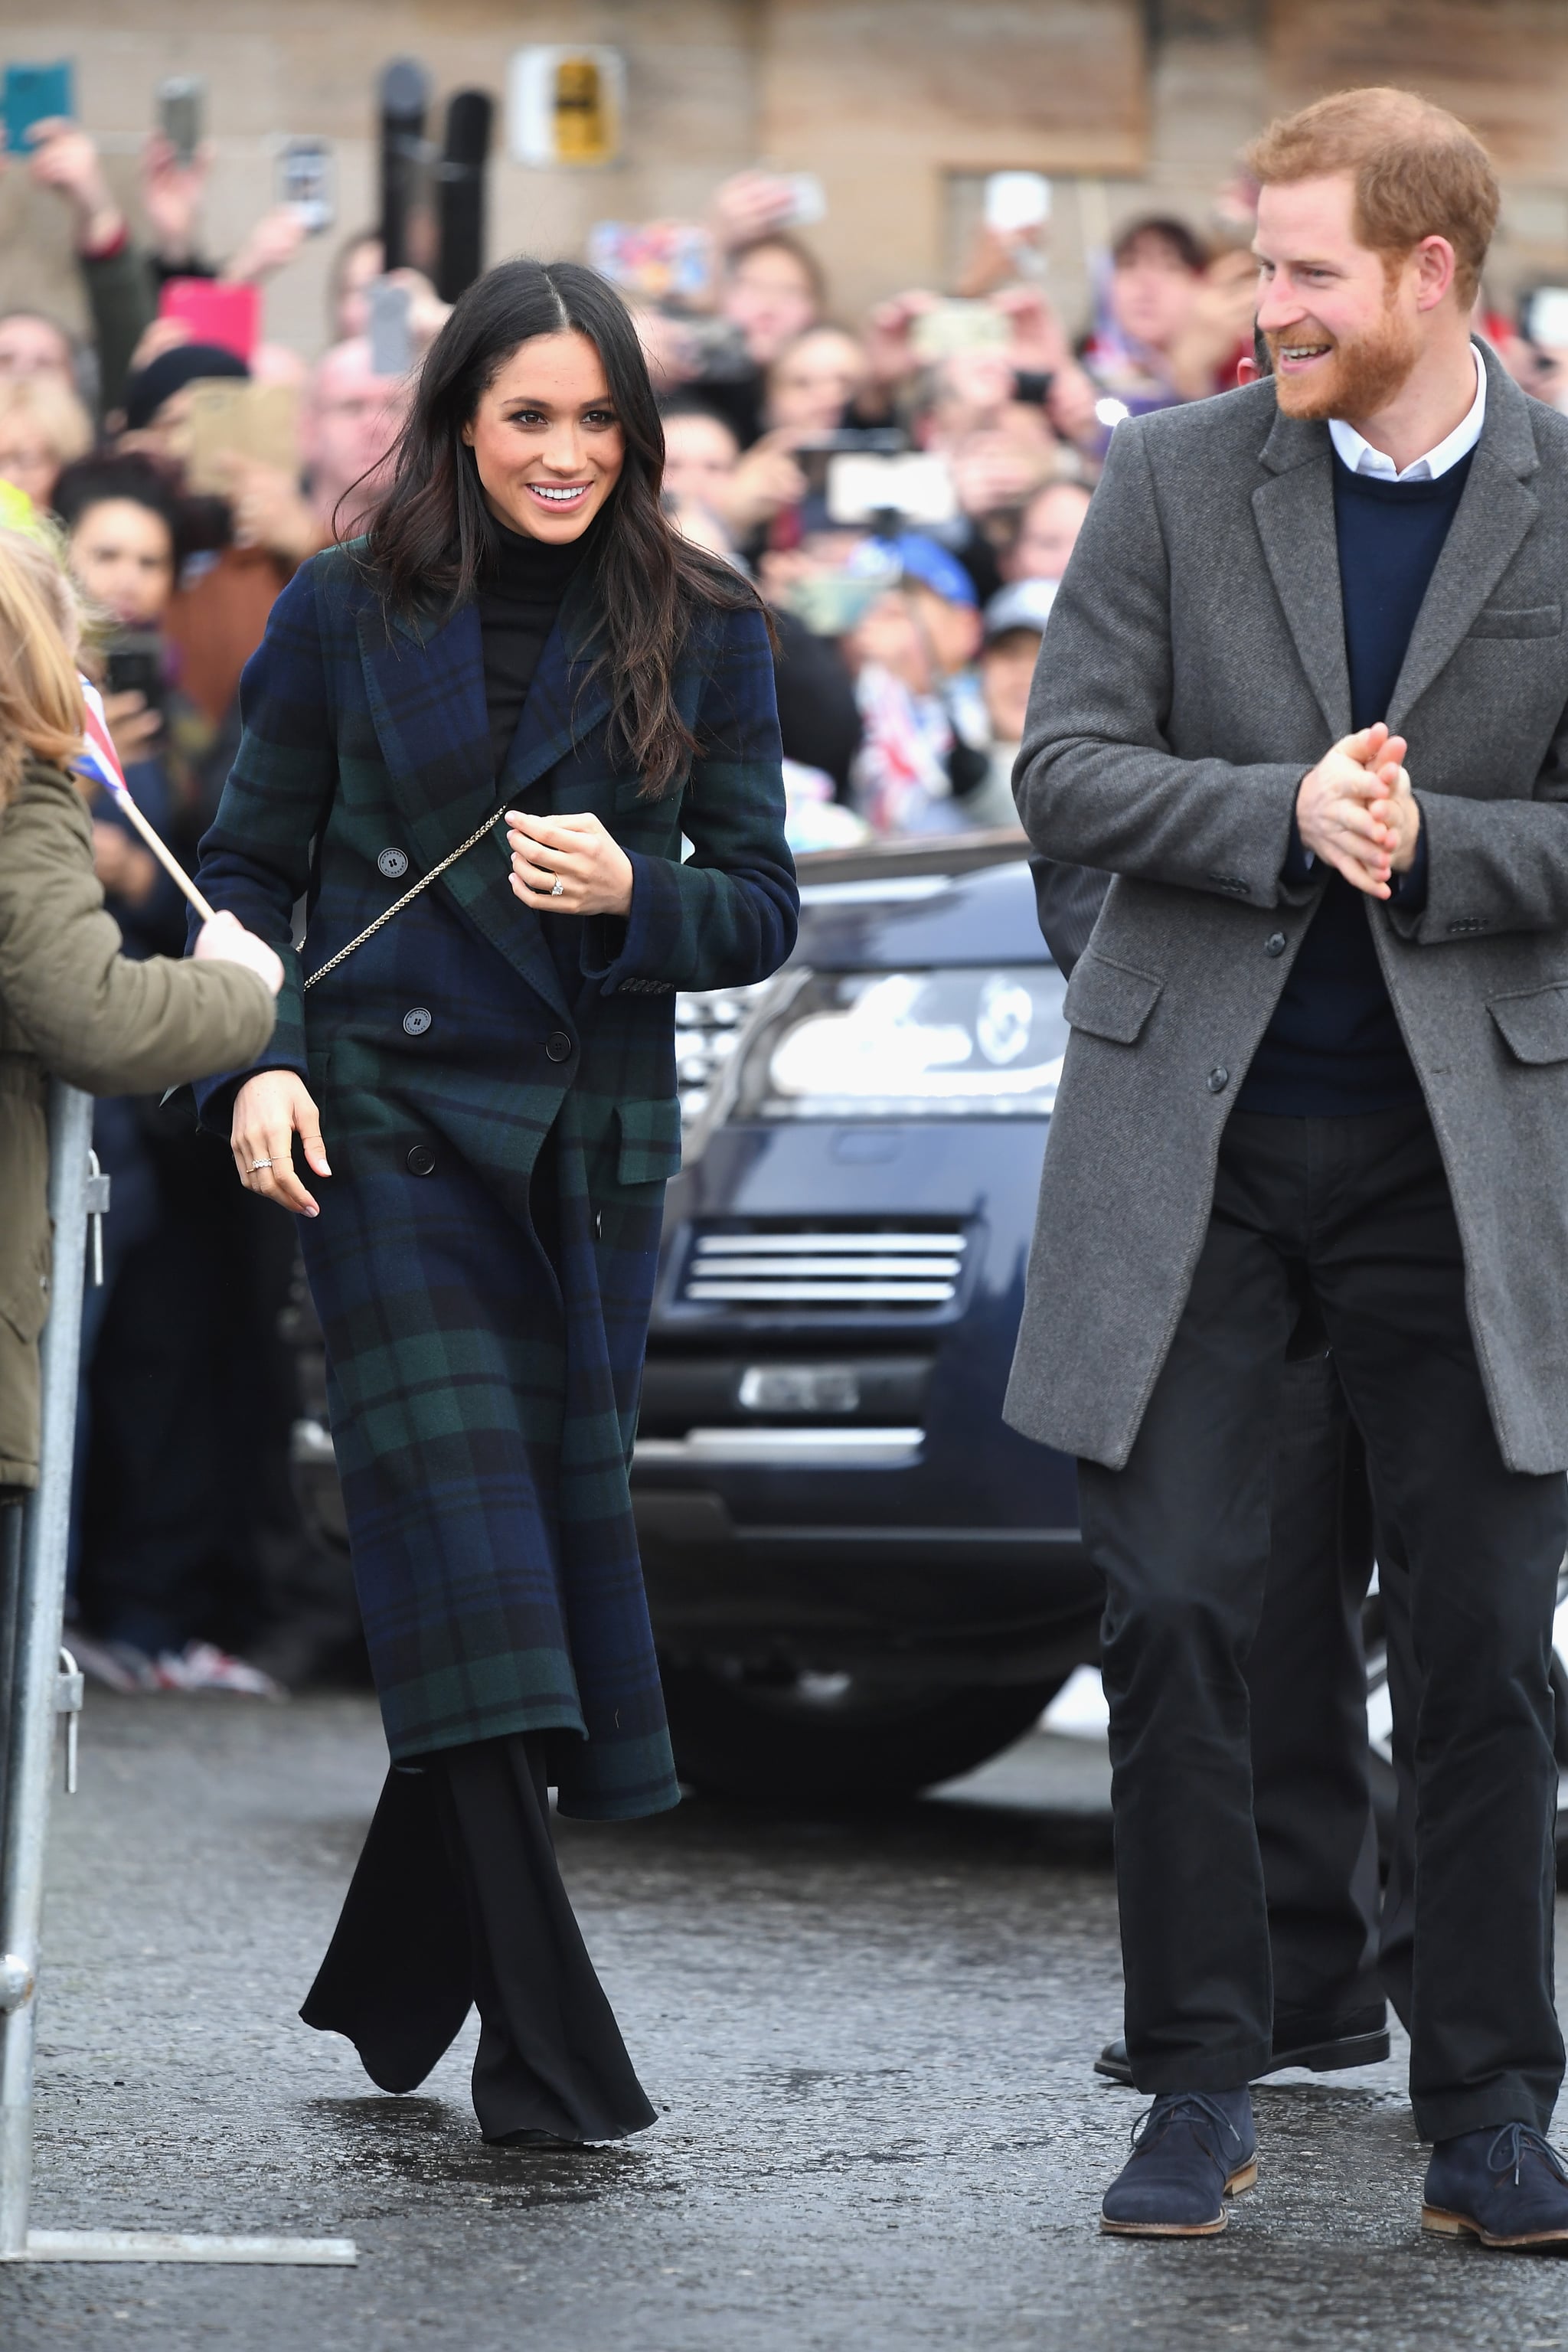 Meghan Markle's £425 Strathberry crossbody bag sells out